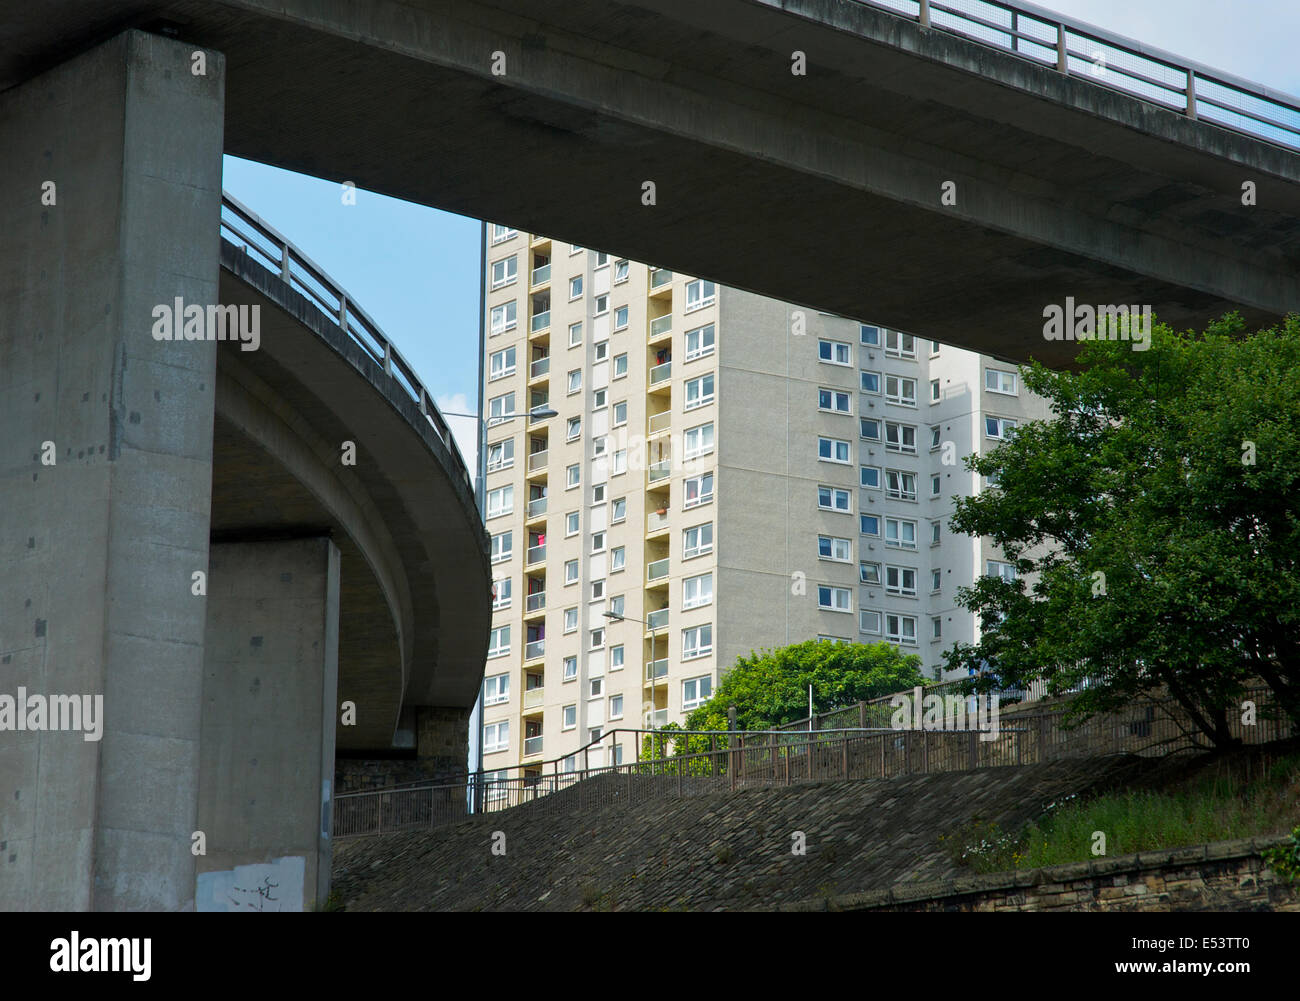 Flyover and high-rise flats: urban bleakness in Halifax, West Yorkshire, England UK Stock Photo